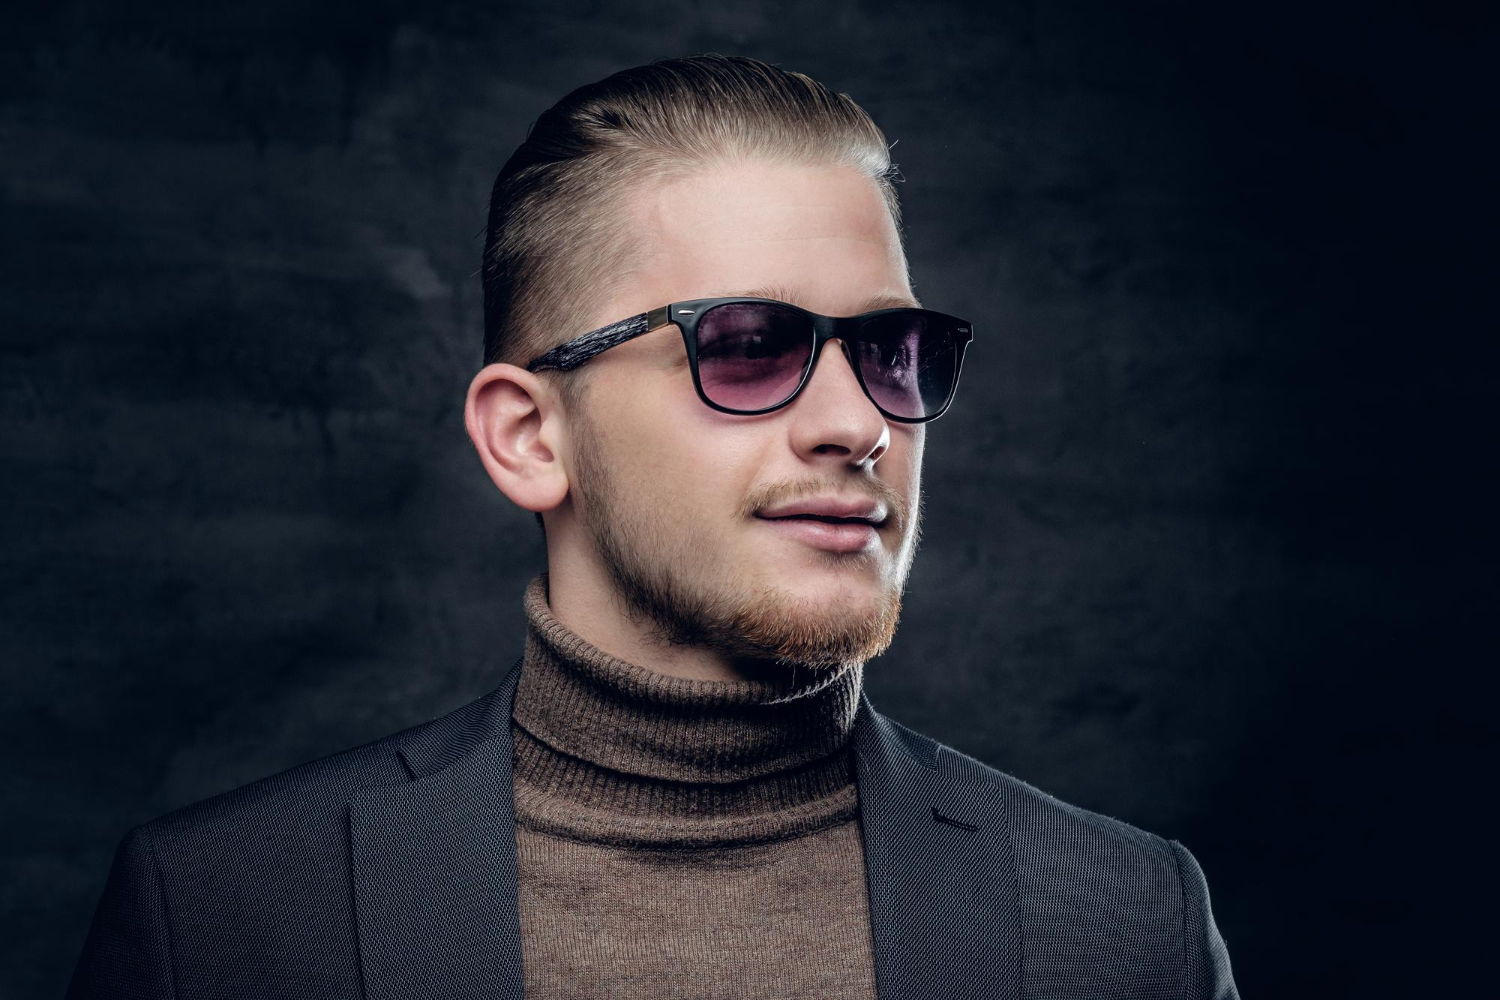 Matching colors and fabrics to achieve the perfect men's turtleneck outfit